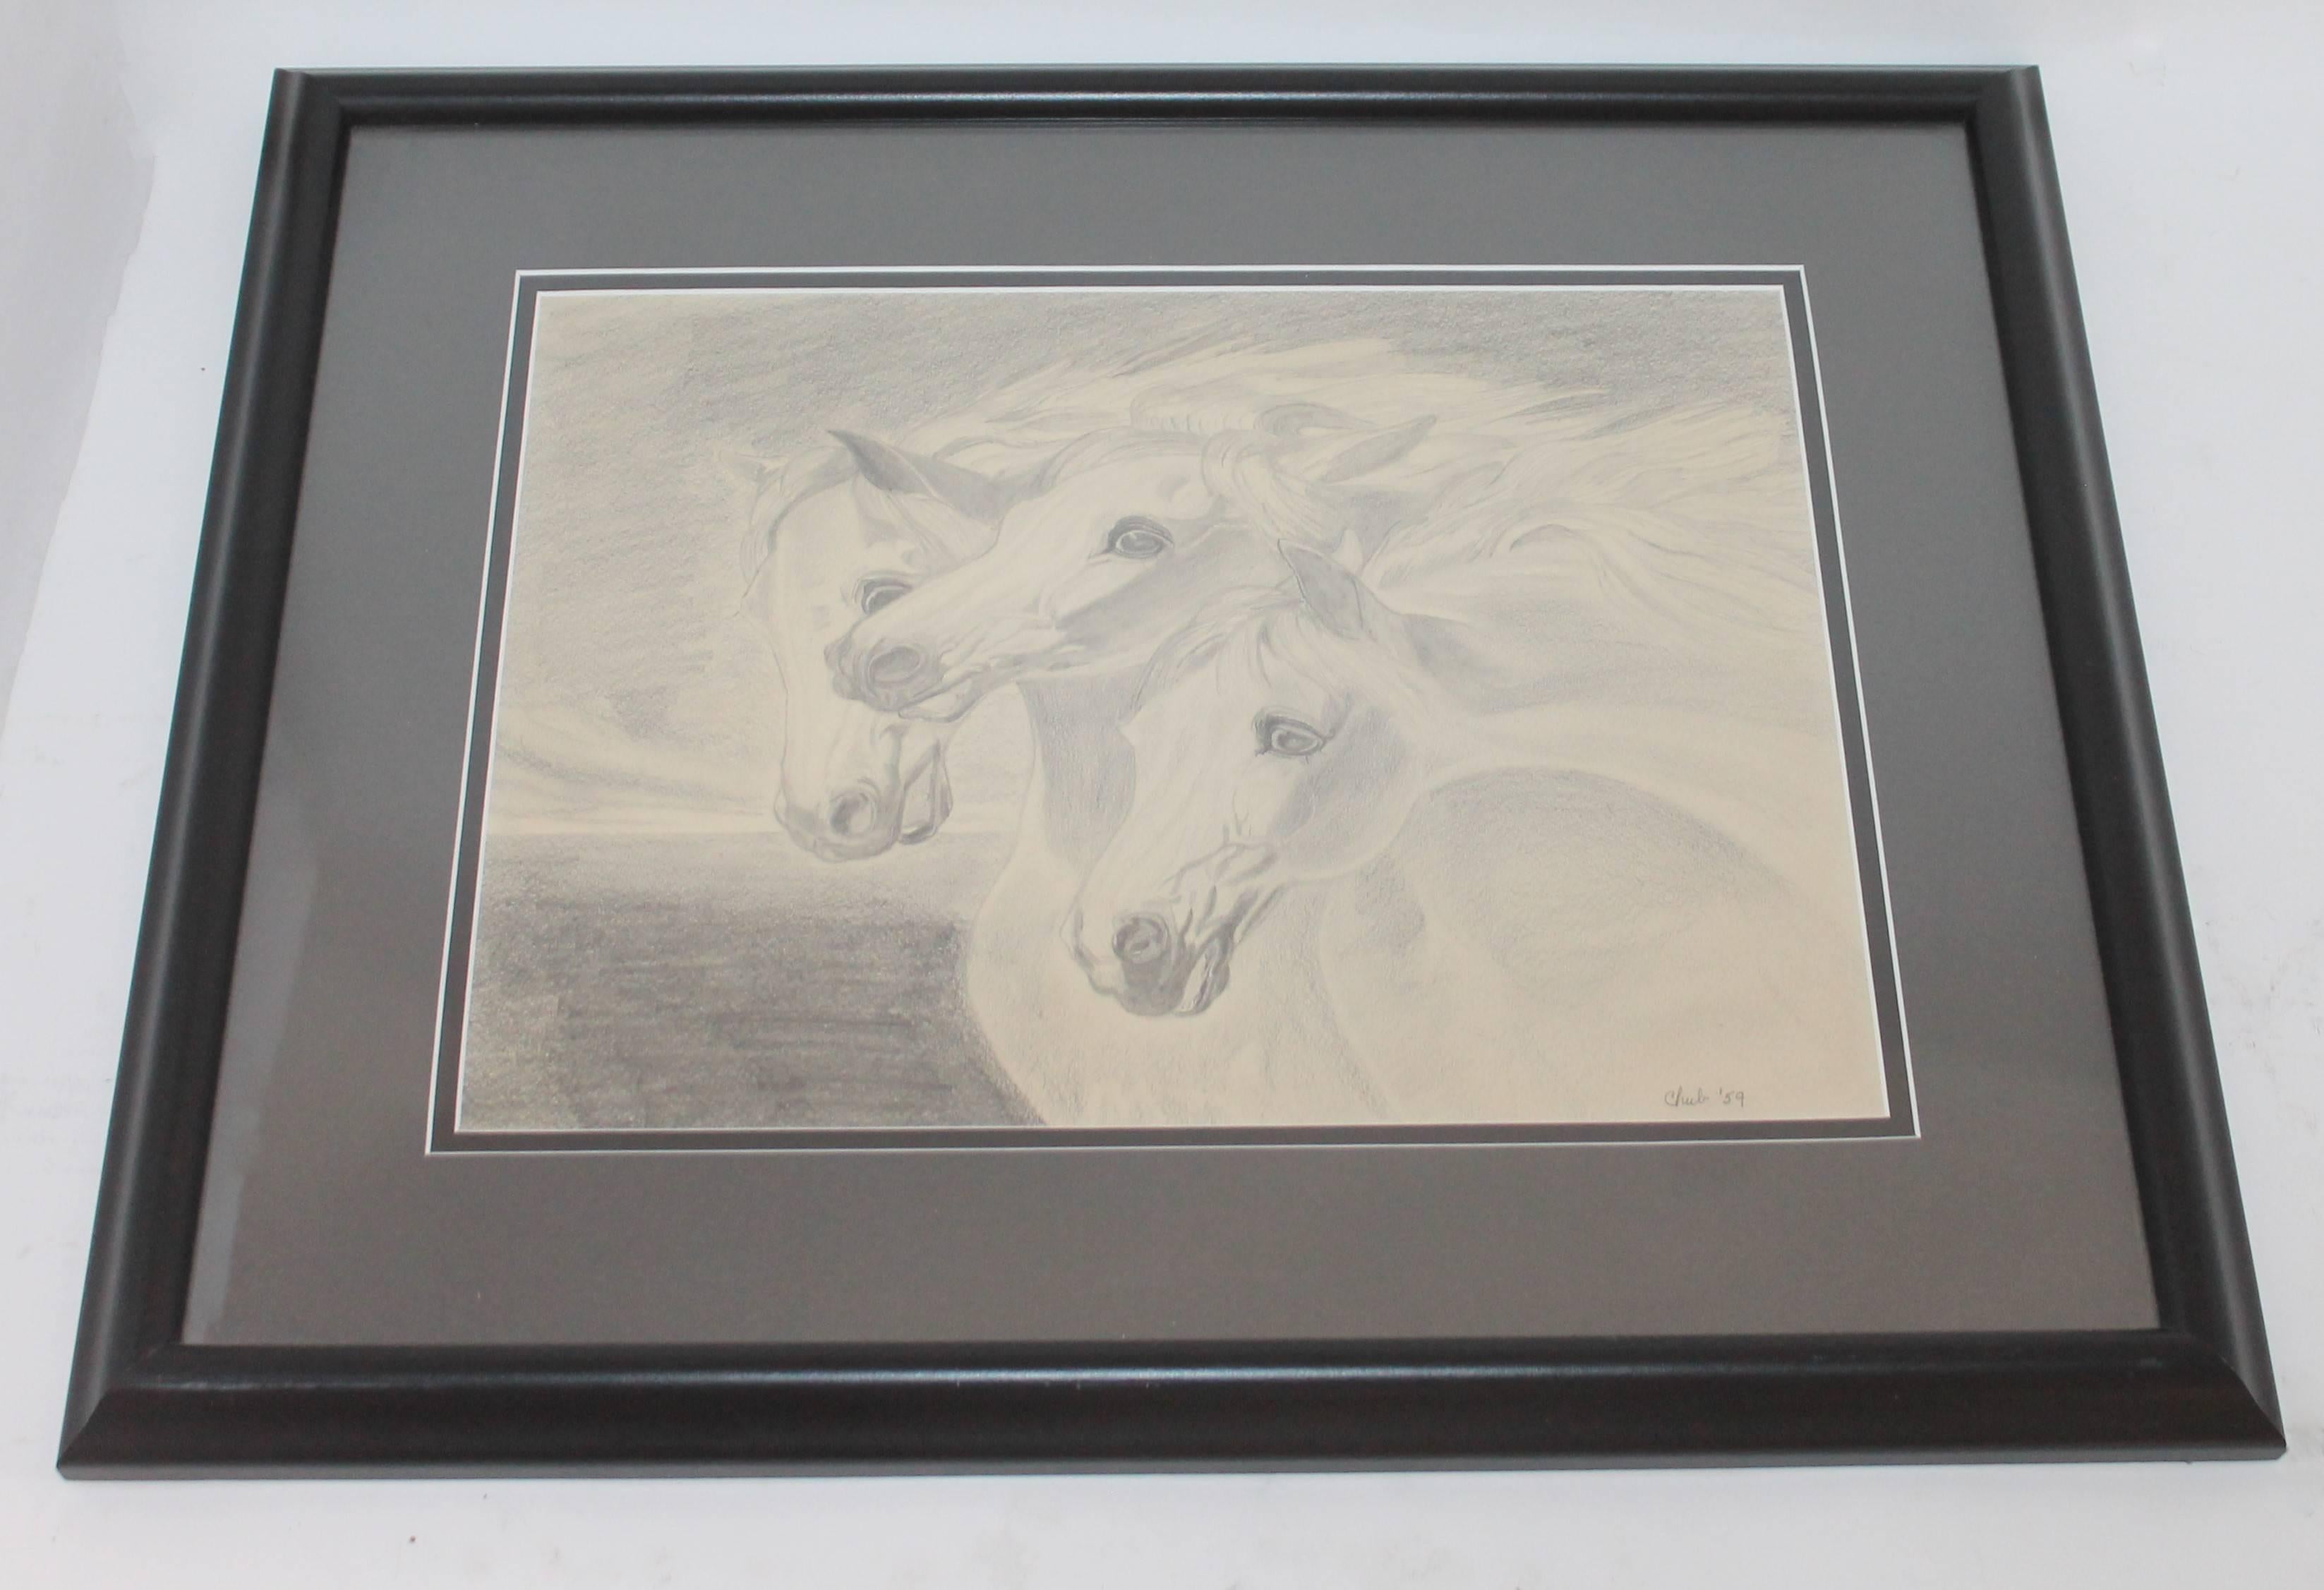 Amazing drawing of three horses galloping. This painting is signed "Chub 59' ". This drawing has a custom-made black painted frame.